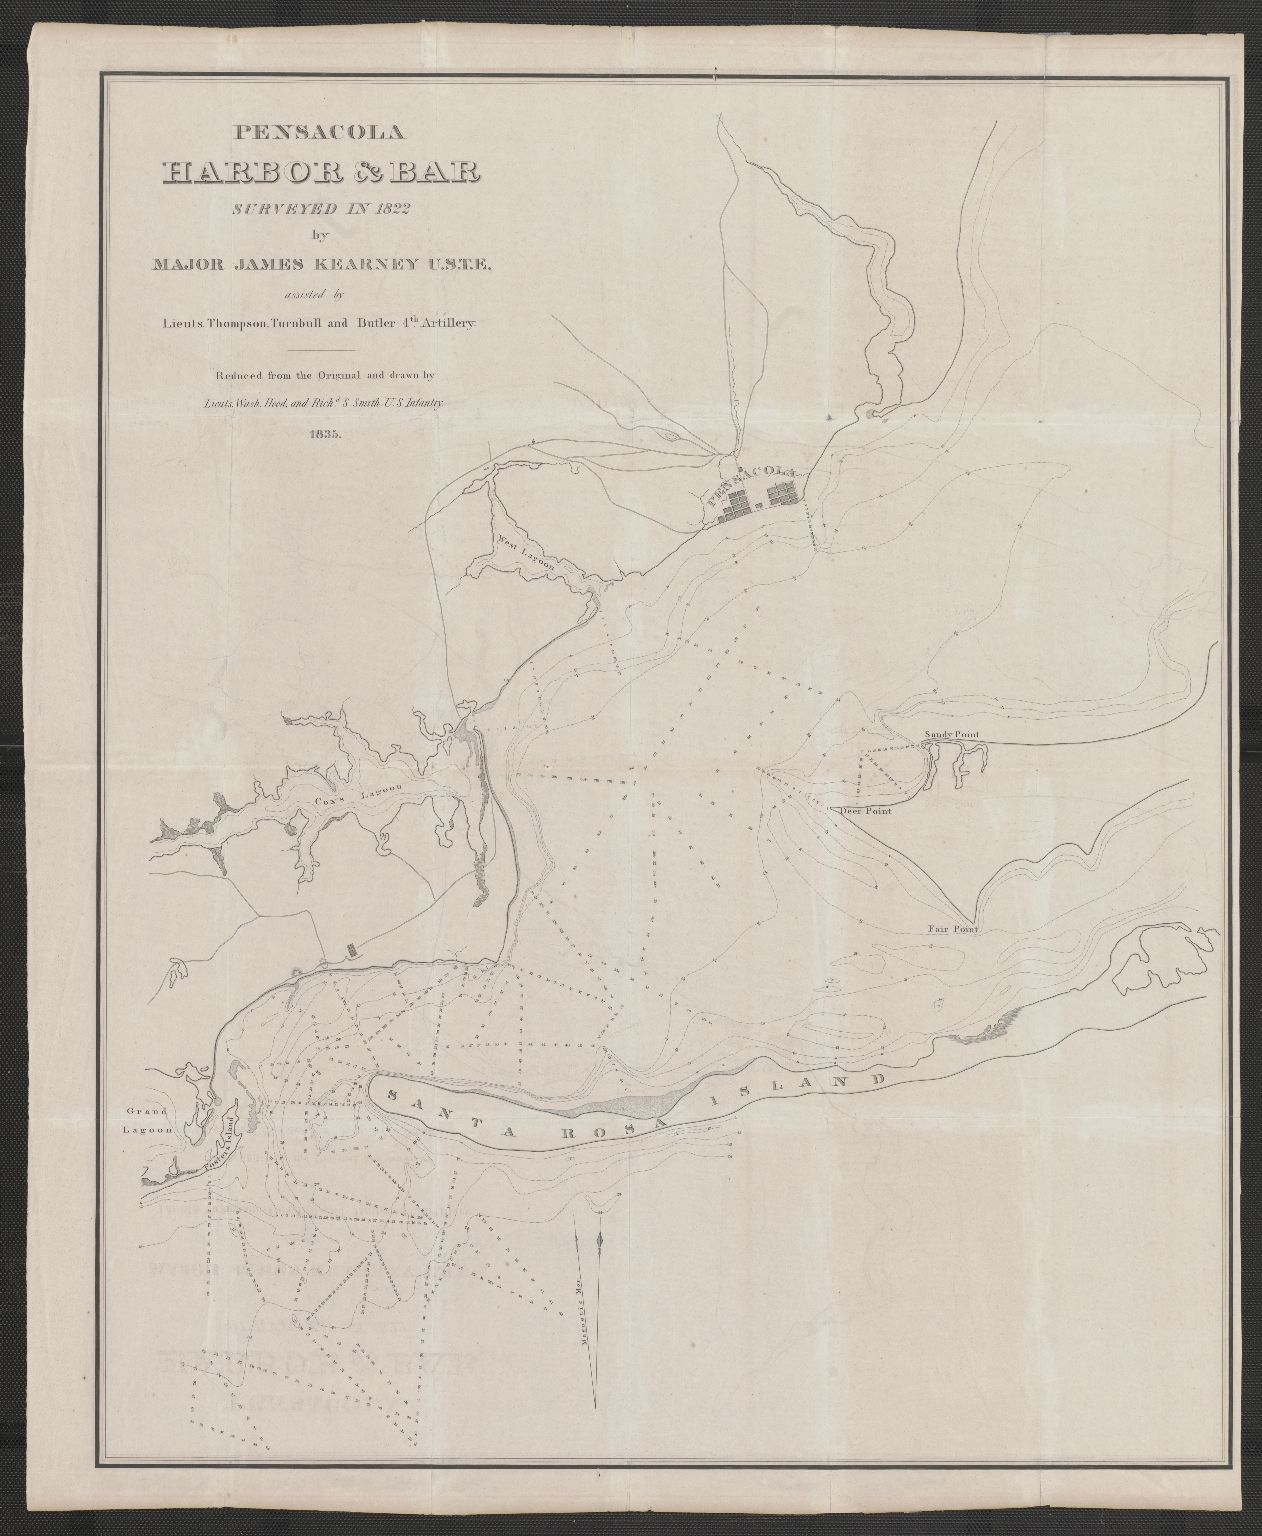 Pensacola harbor and bar : surveyed in 1822.